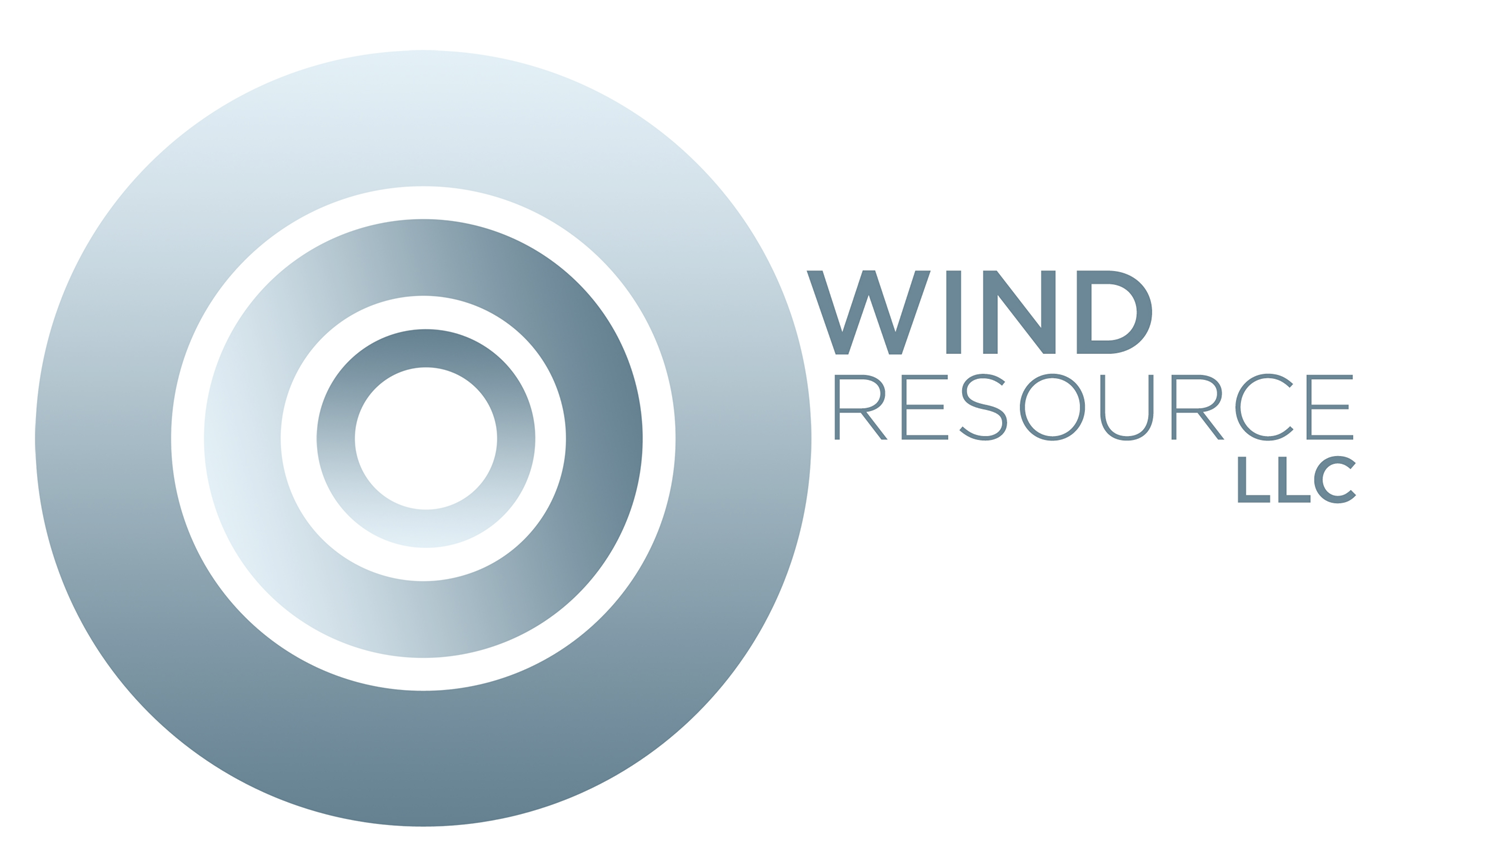 Wind energy market research